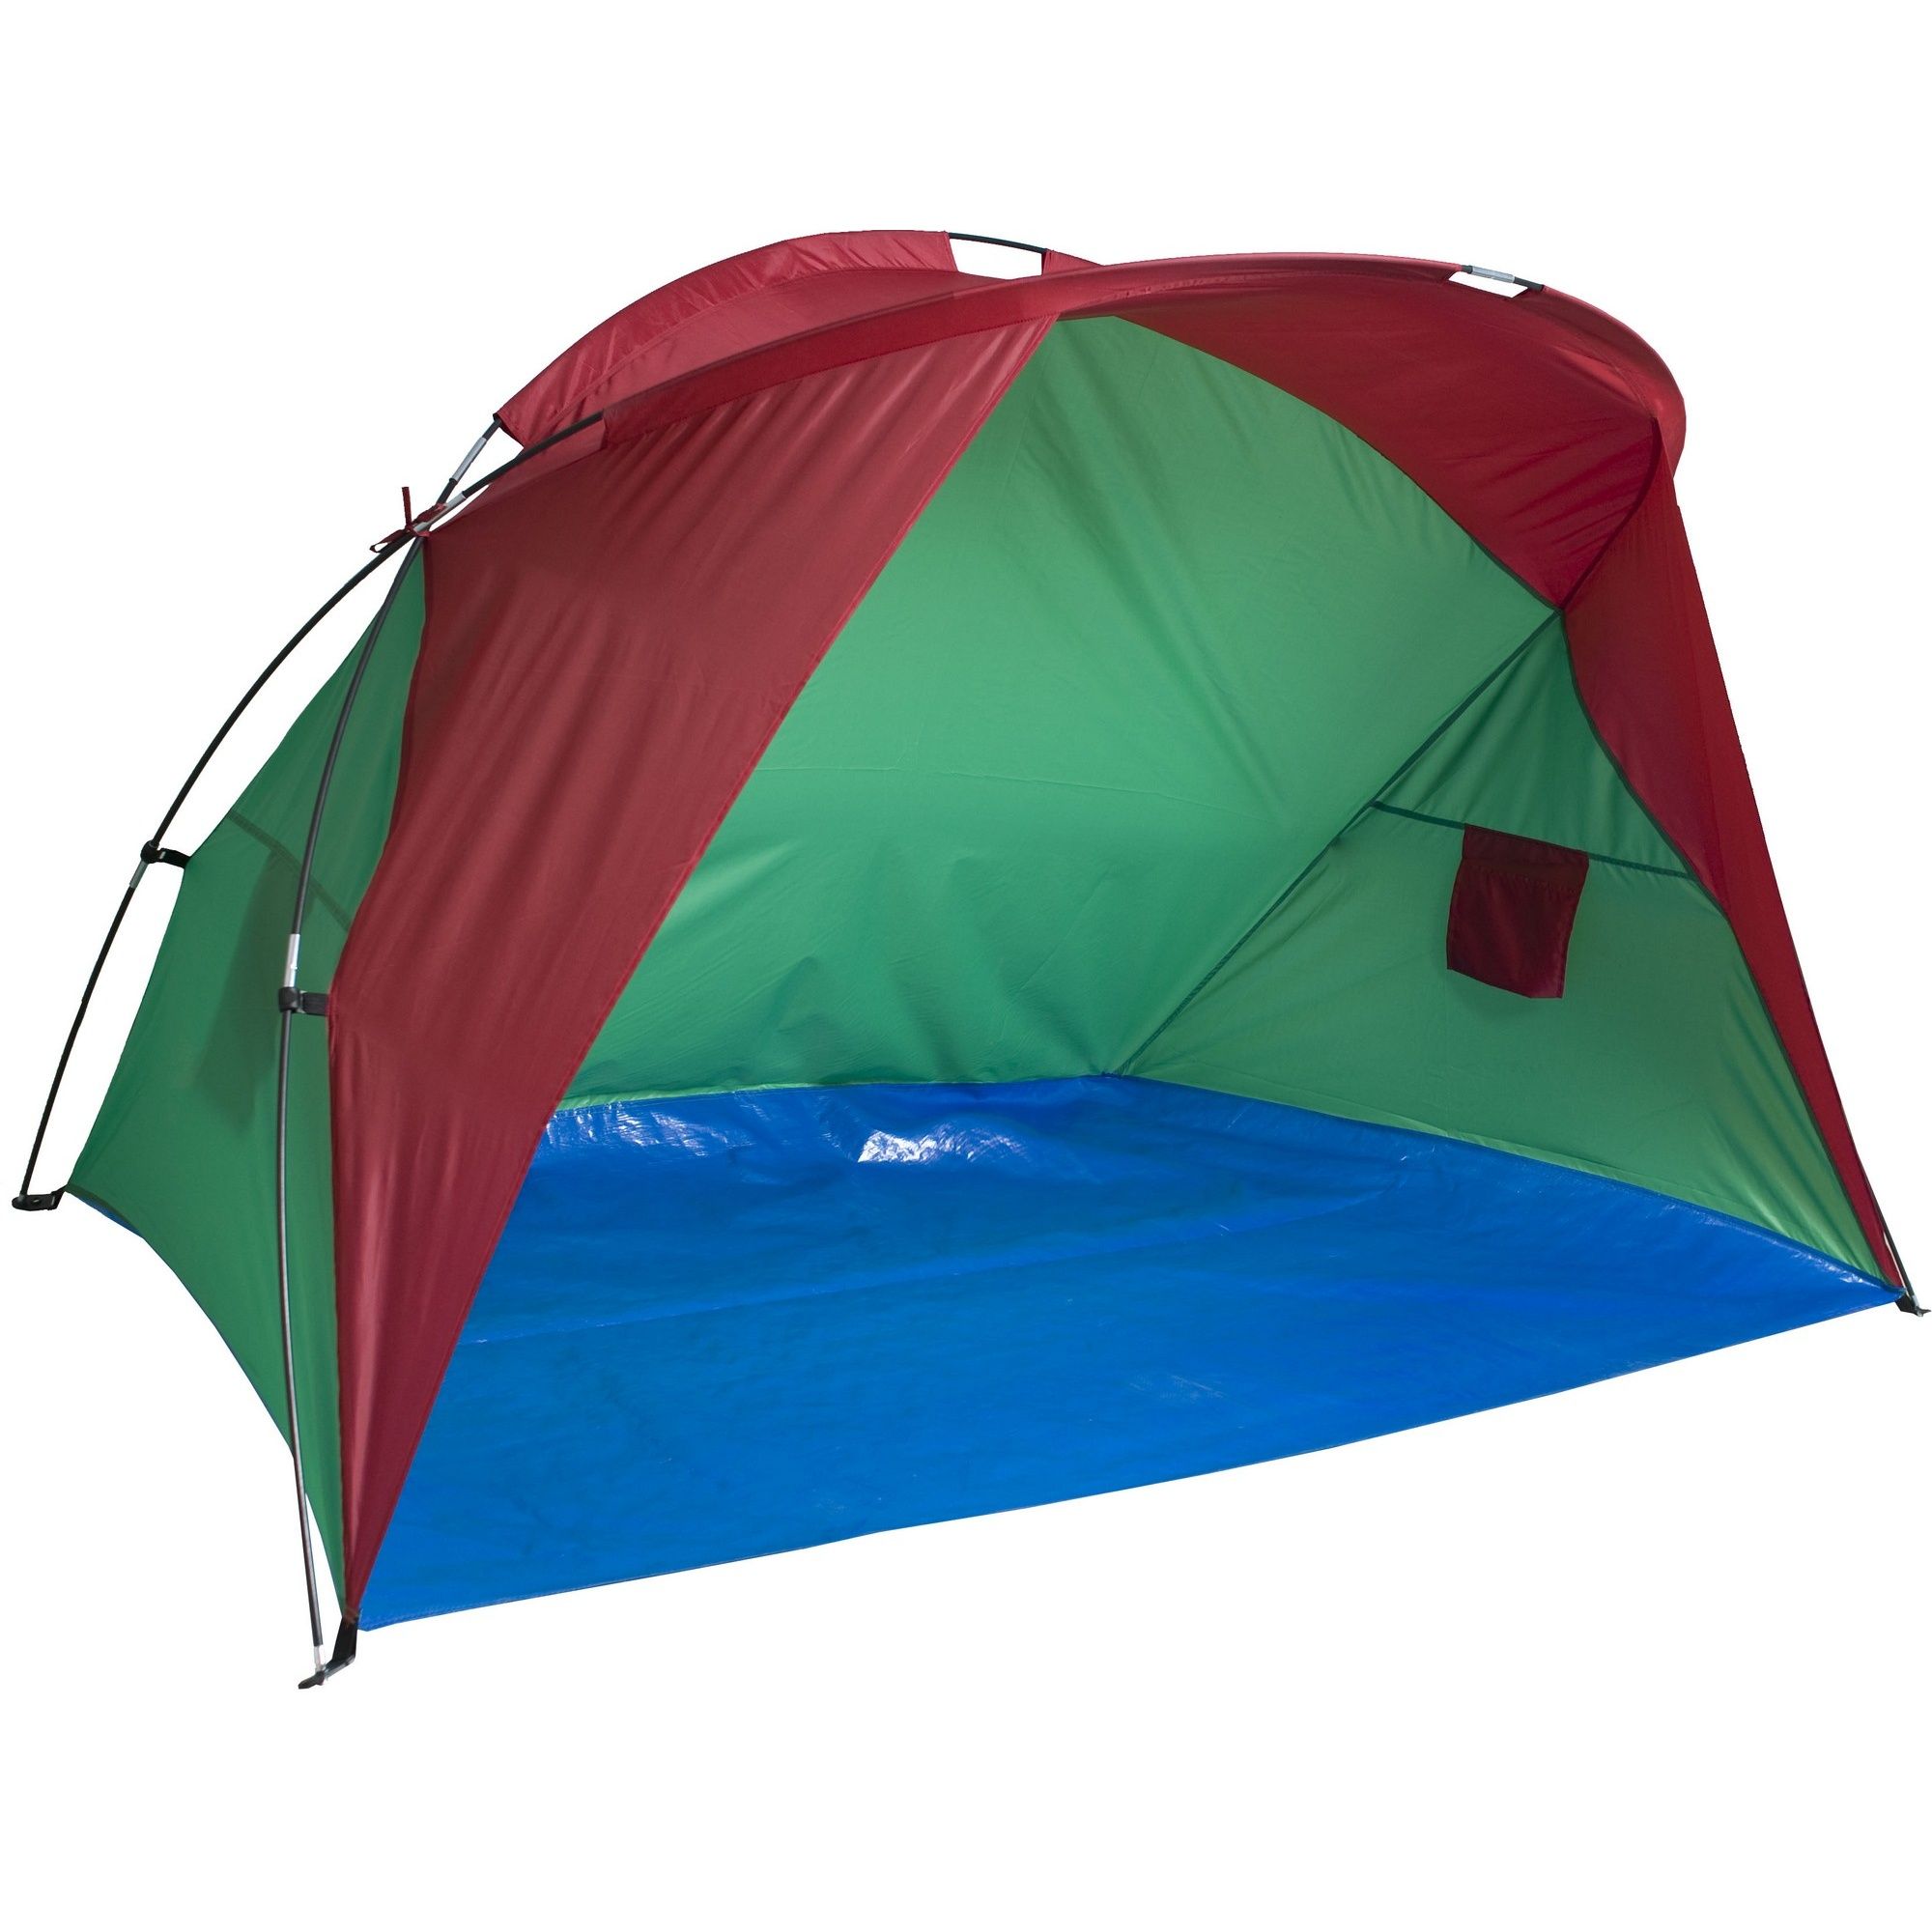 100% polyester. Beach tent shelter. Fibre glass poles. Includes guy ropes and tent pegs. Water resistant floor sheet. Dimensions: 125cm (H)x 240cm (W)x 115cm (D).